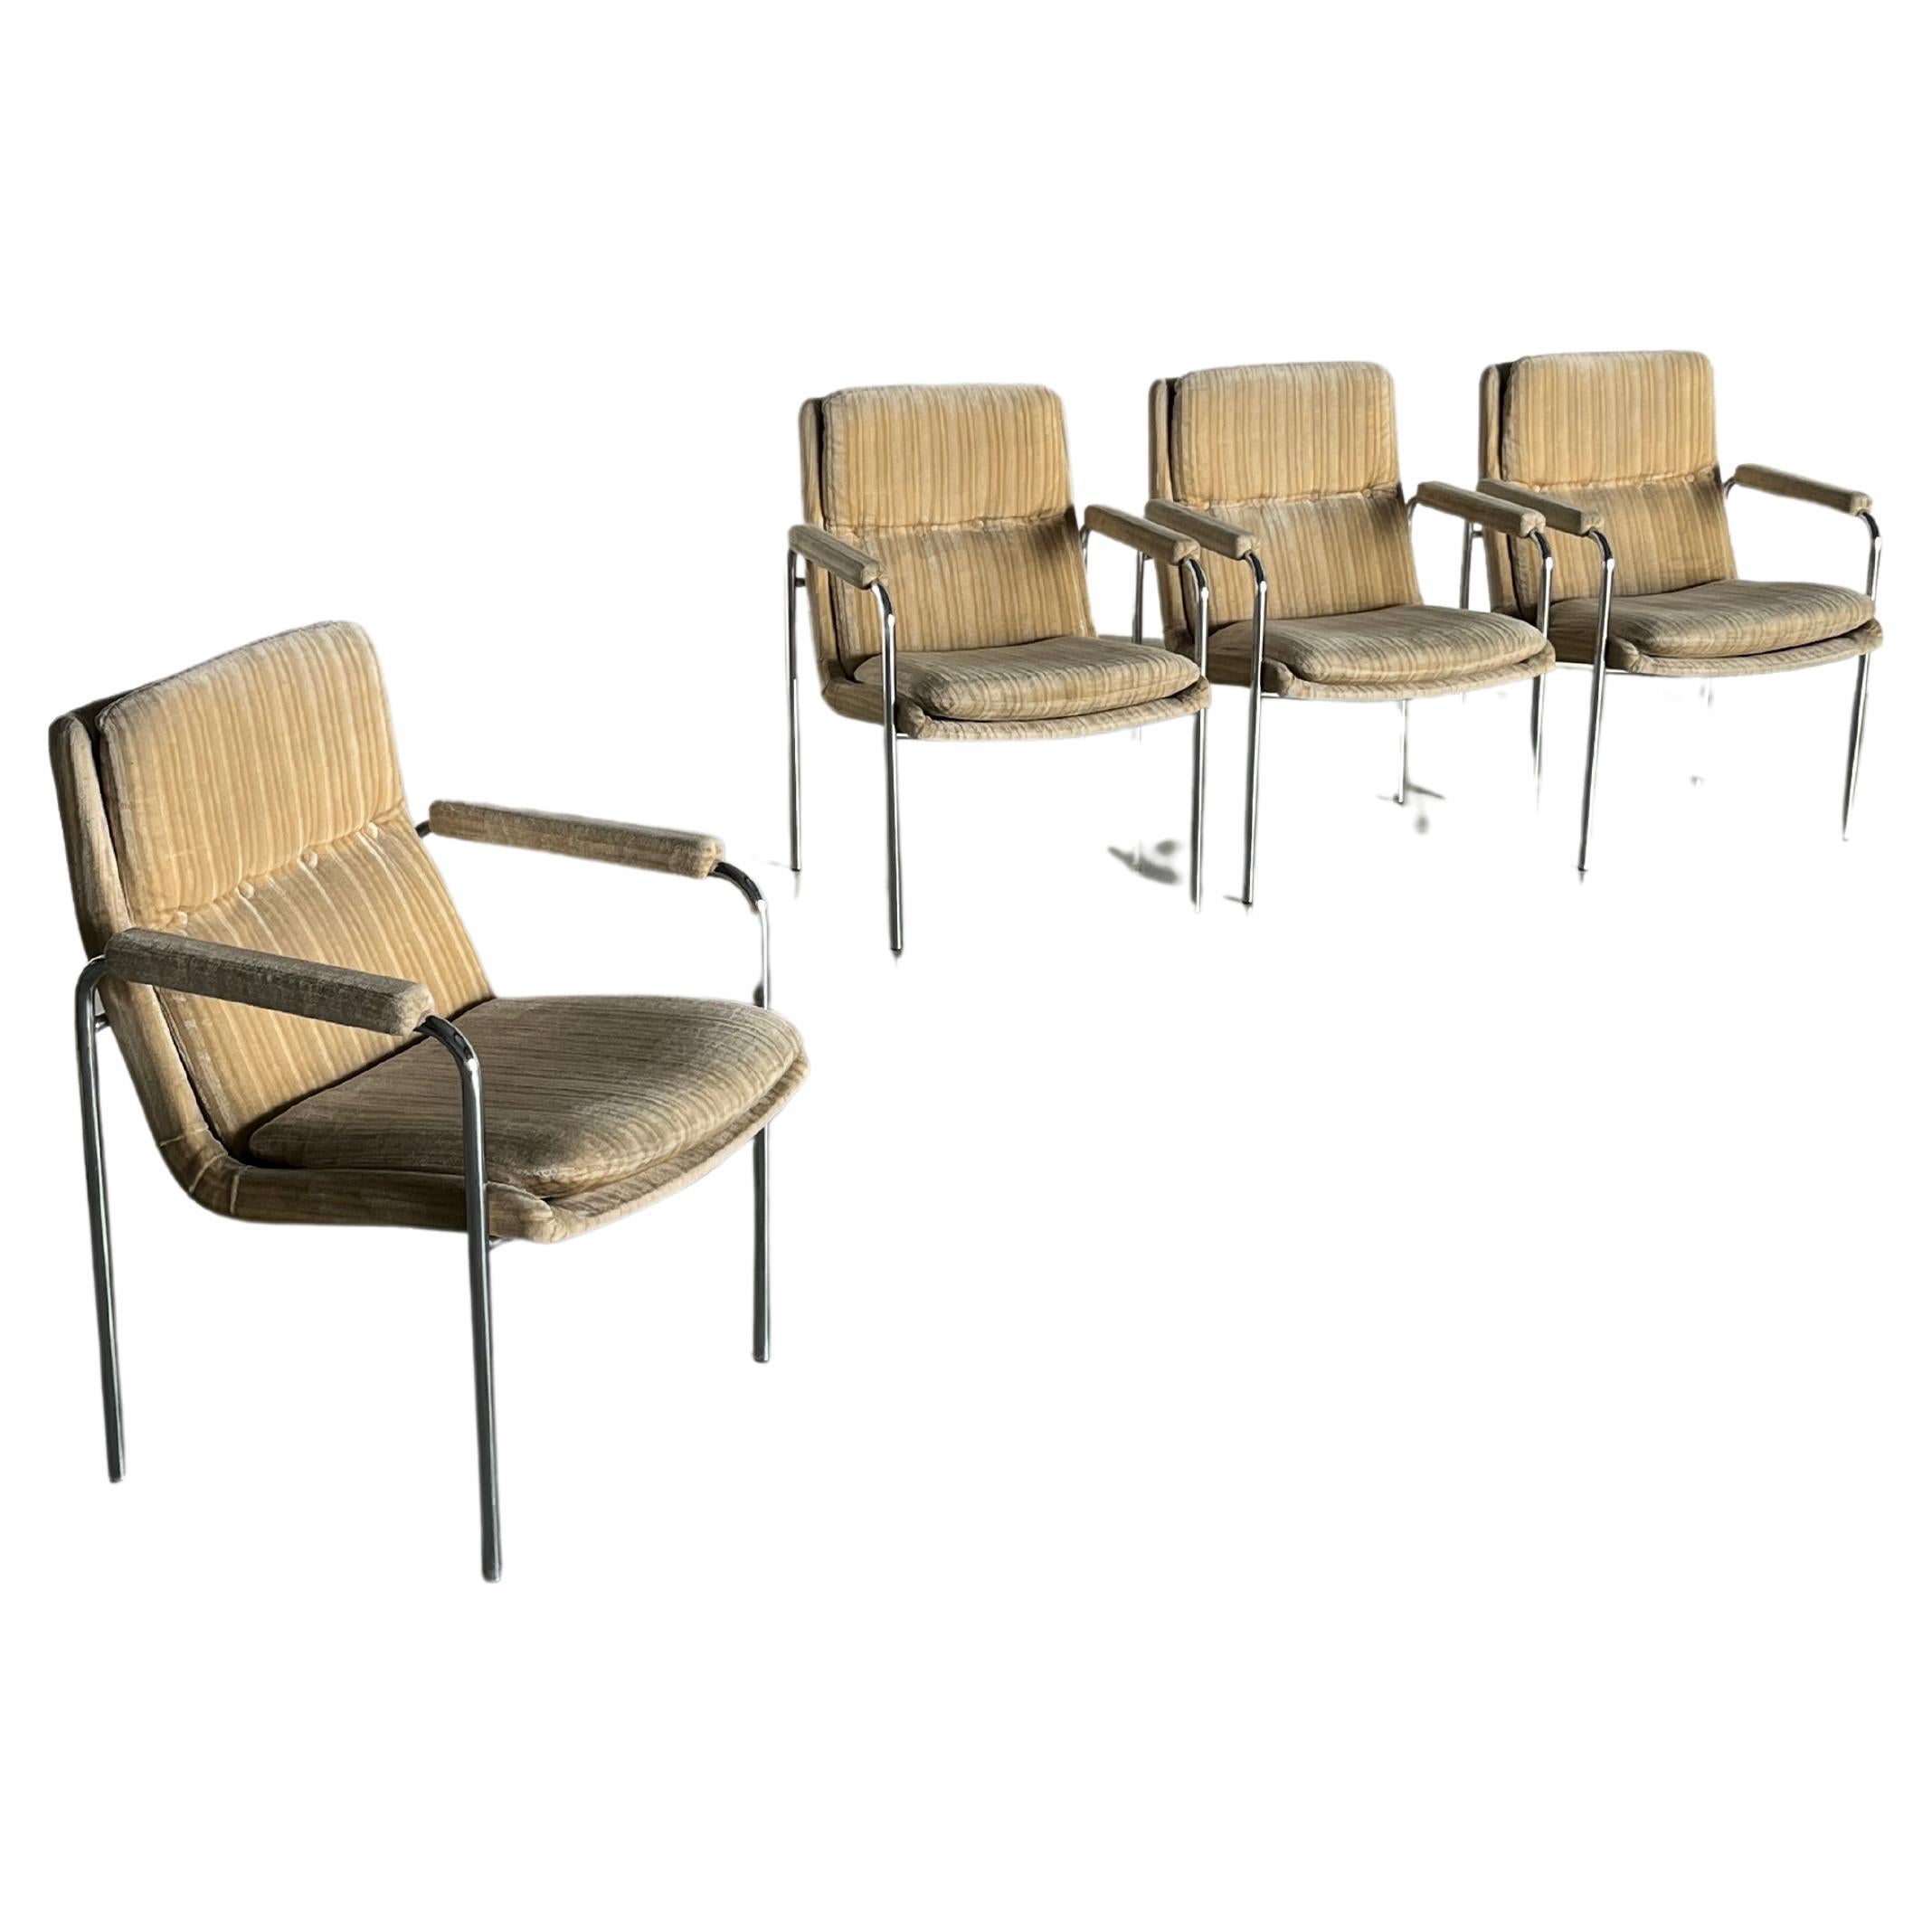 1 of 4 Mid-Century Chrome Tubular Steel and Striped Upholstery Armchairs, 1970s